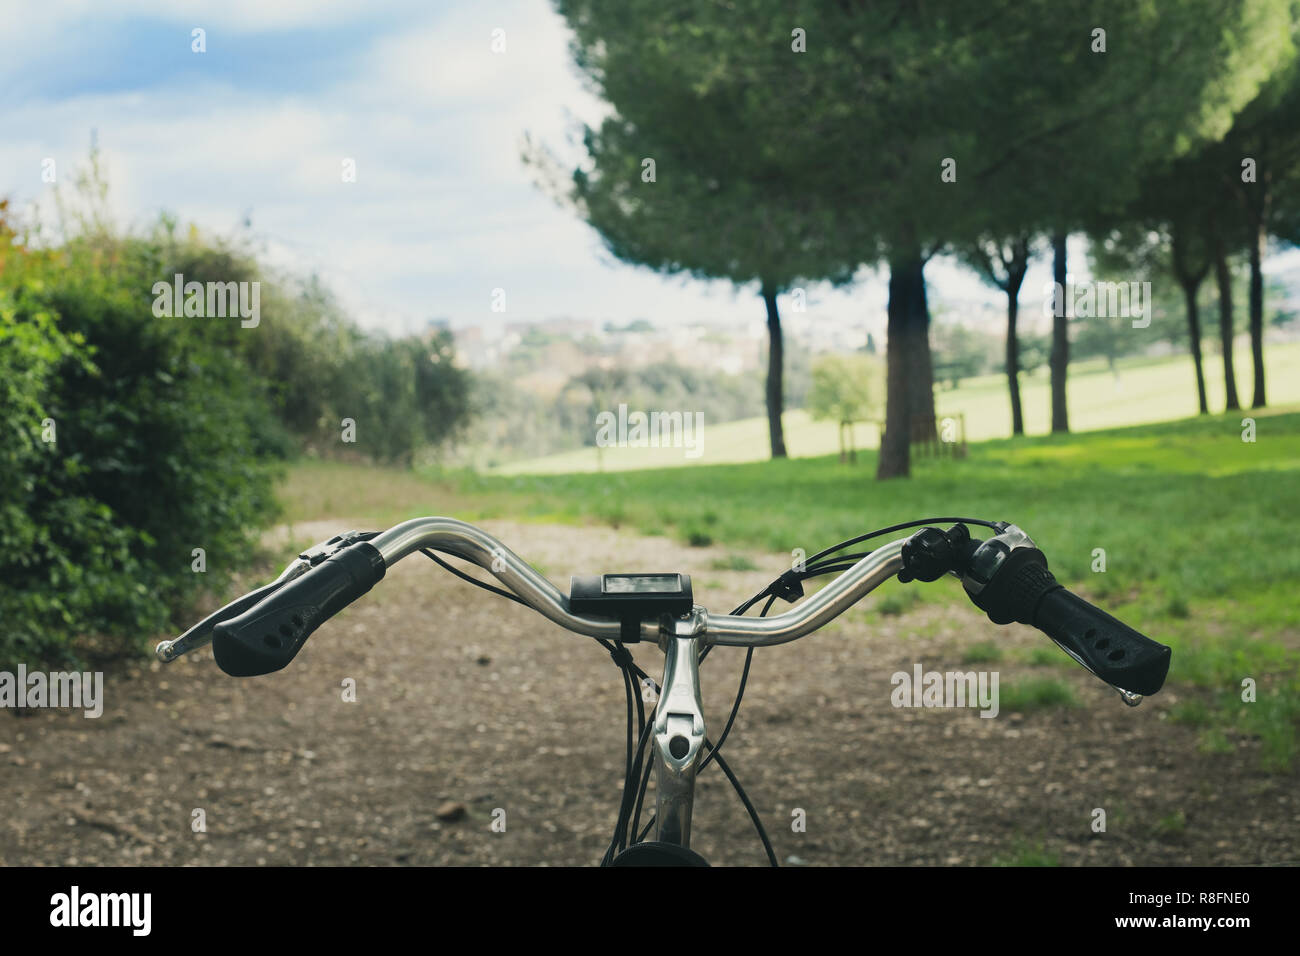 Point of view of riding bicycle in green park, close up on handlebars and defocused park in background Stock Photo